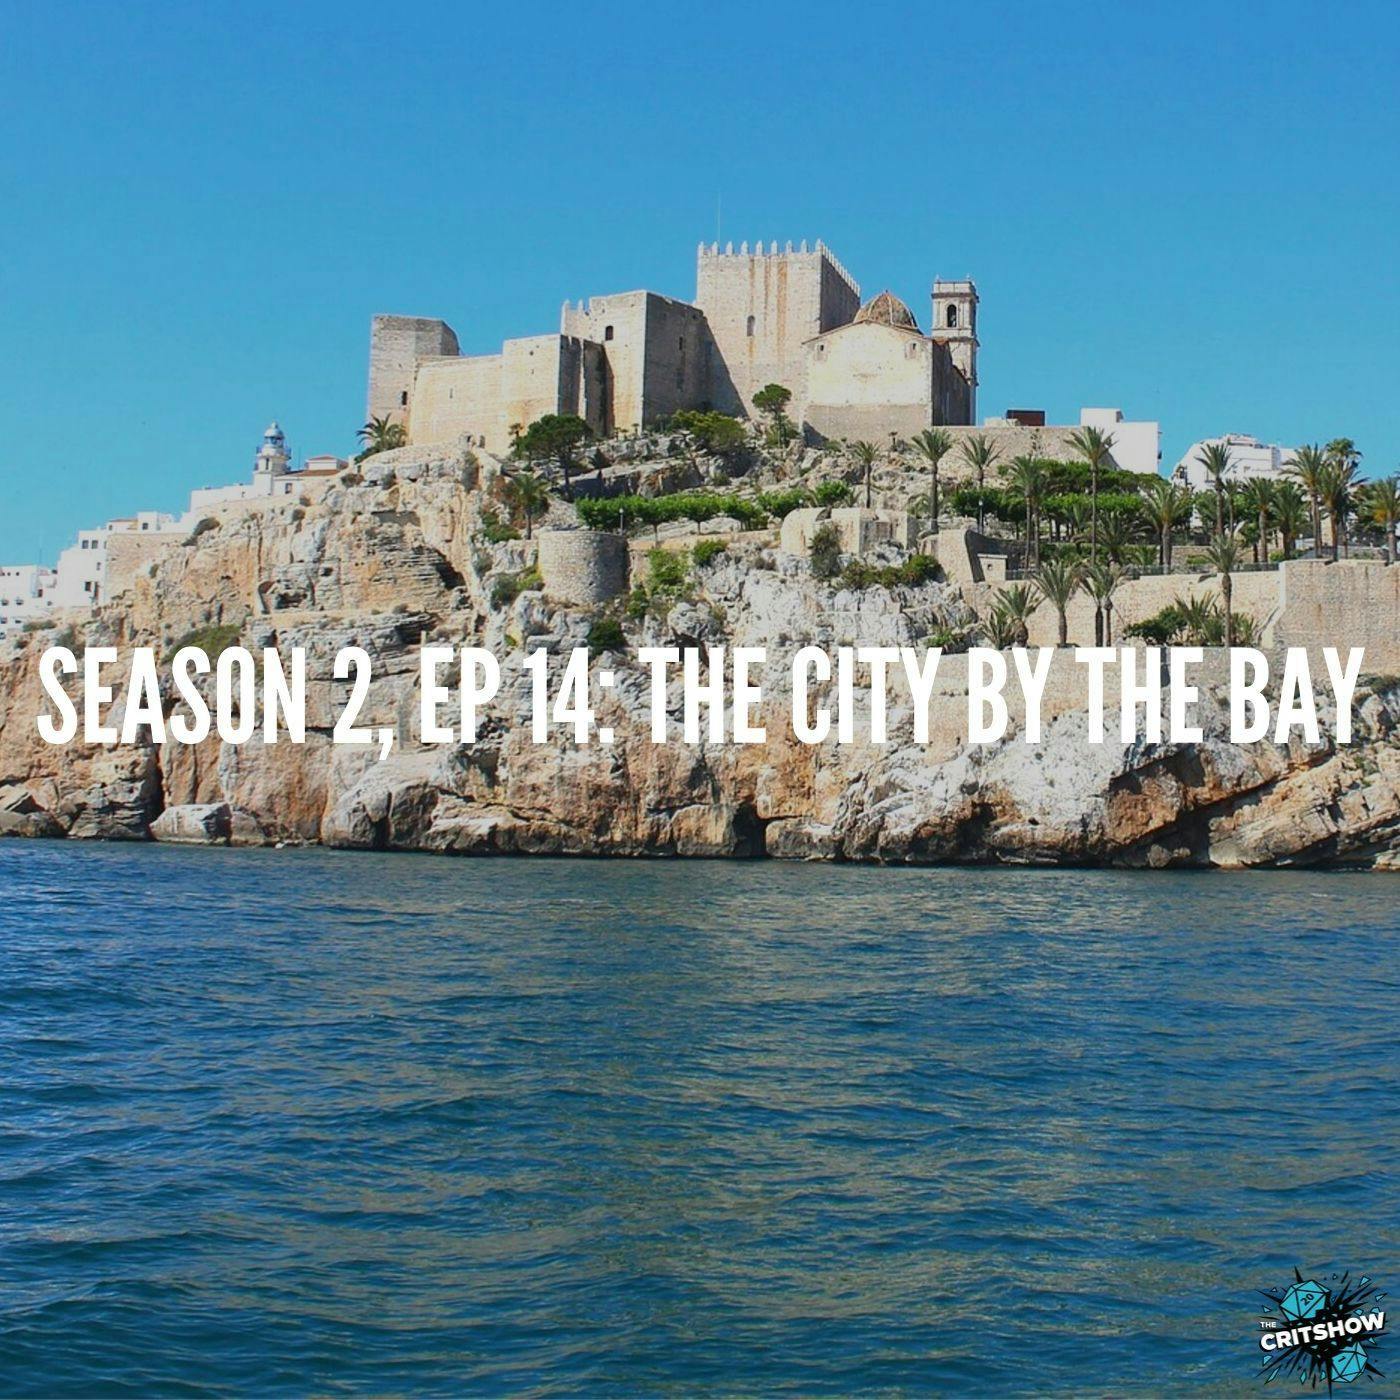 The City by the Bay (S2, E14)